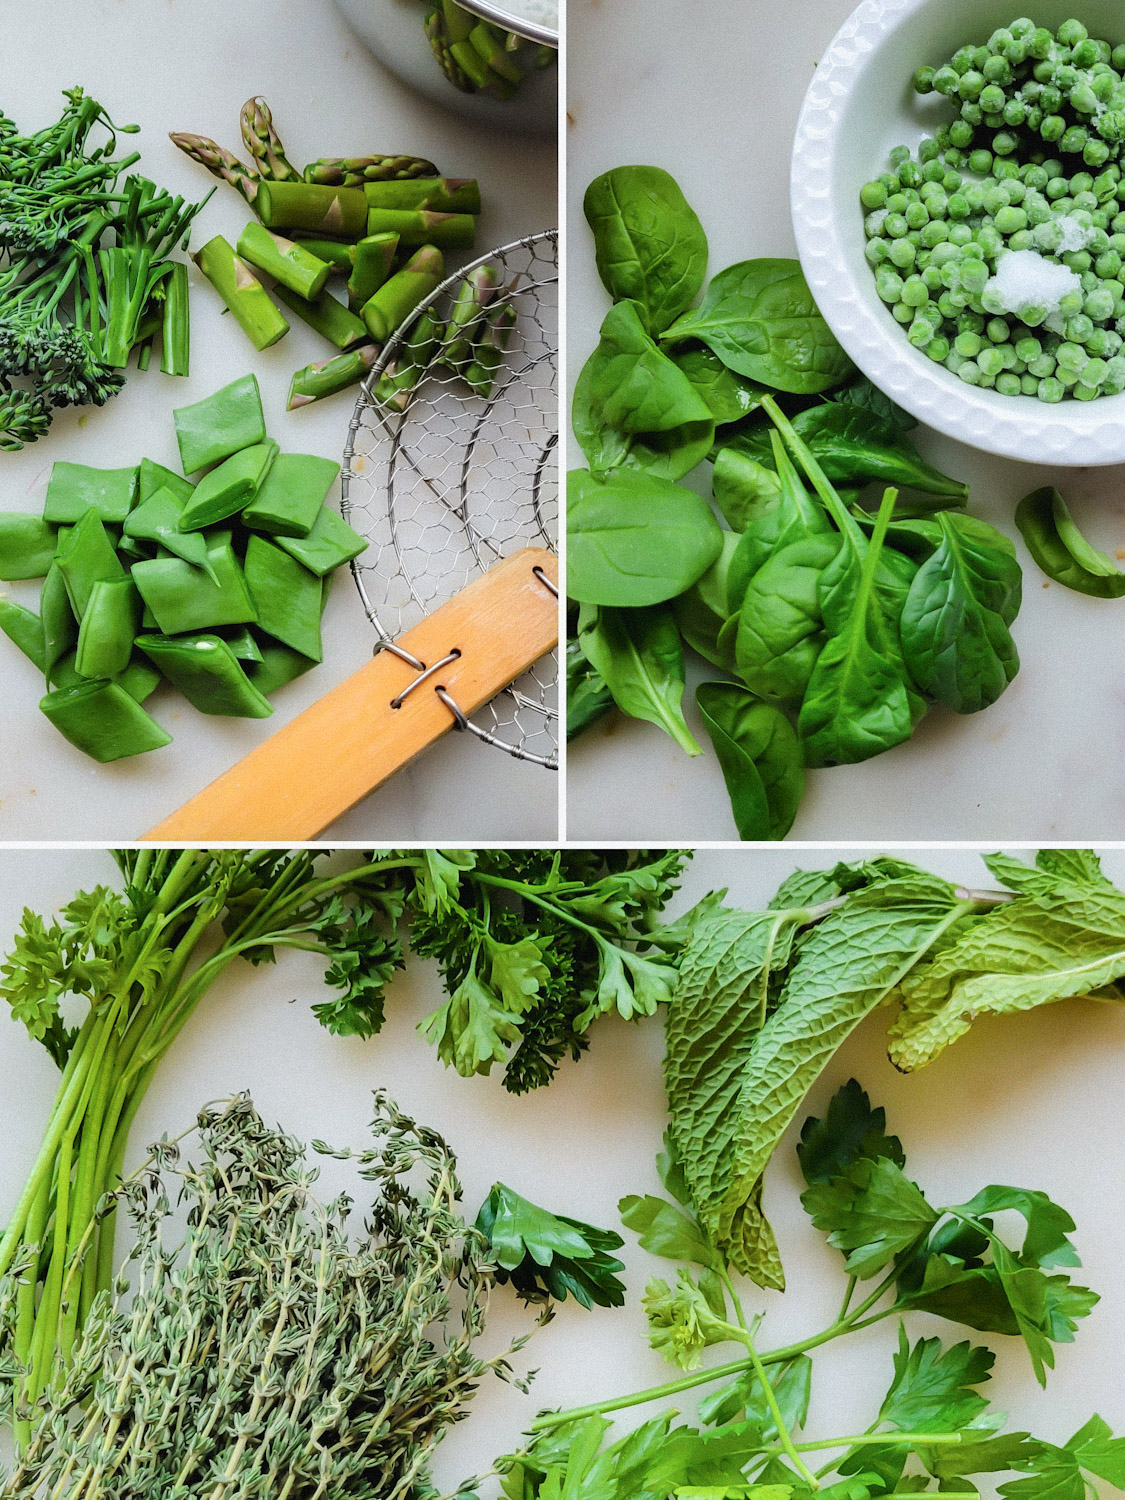 Collage showing the types of vegetables and herbs that can used in Lemon Cream Pasta with Spring Vegetables.